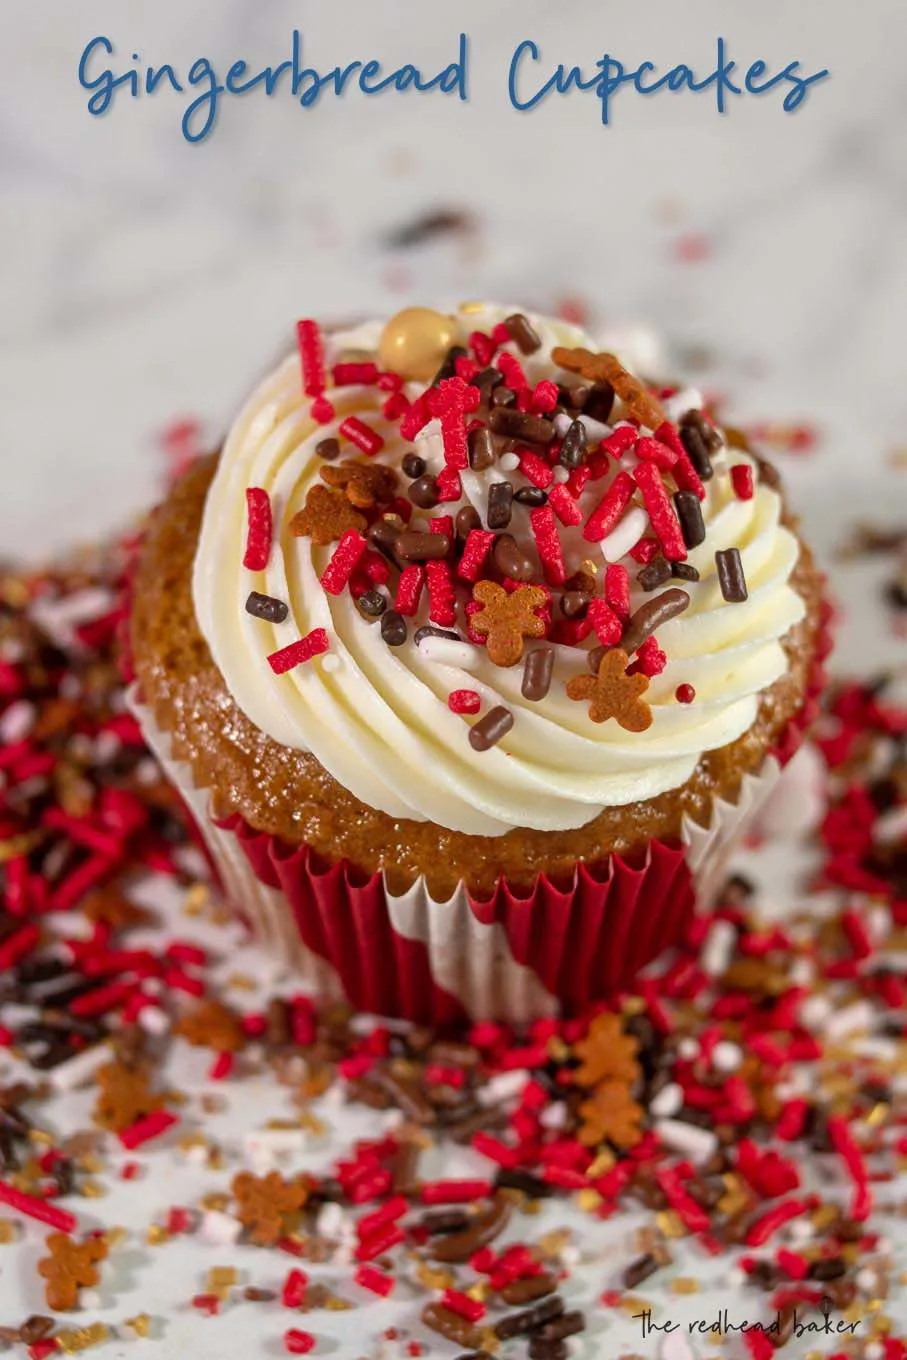 A gingerbread cupcake with cream cheese frosting amid a layer of Sweets and Treats gingerbread sprinkles